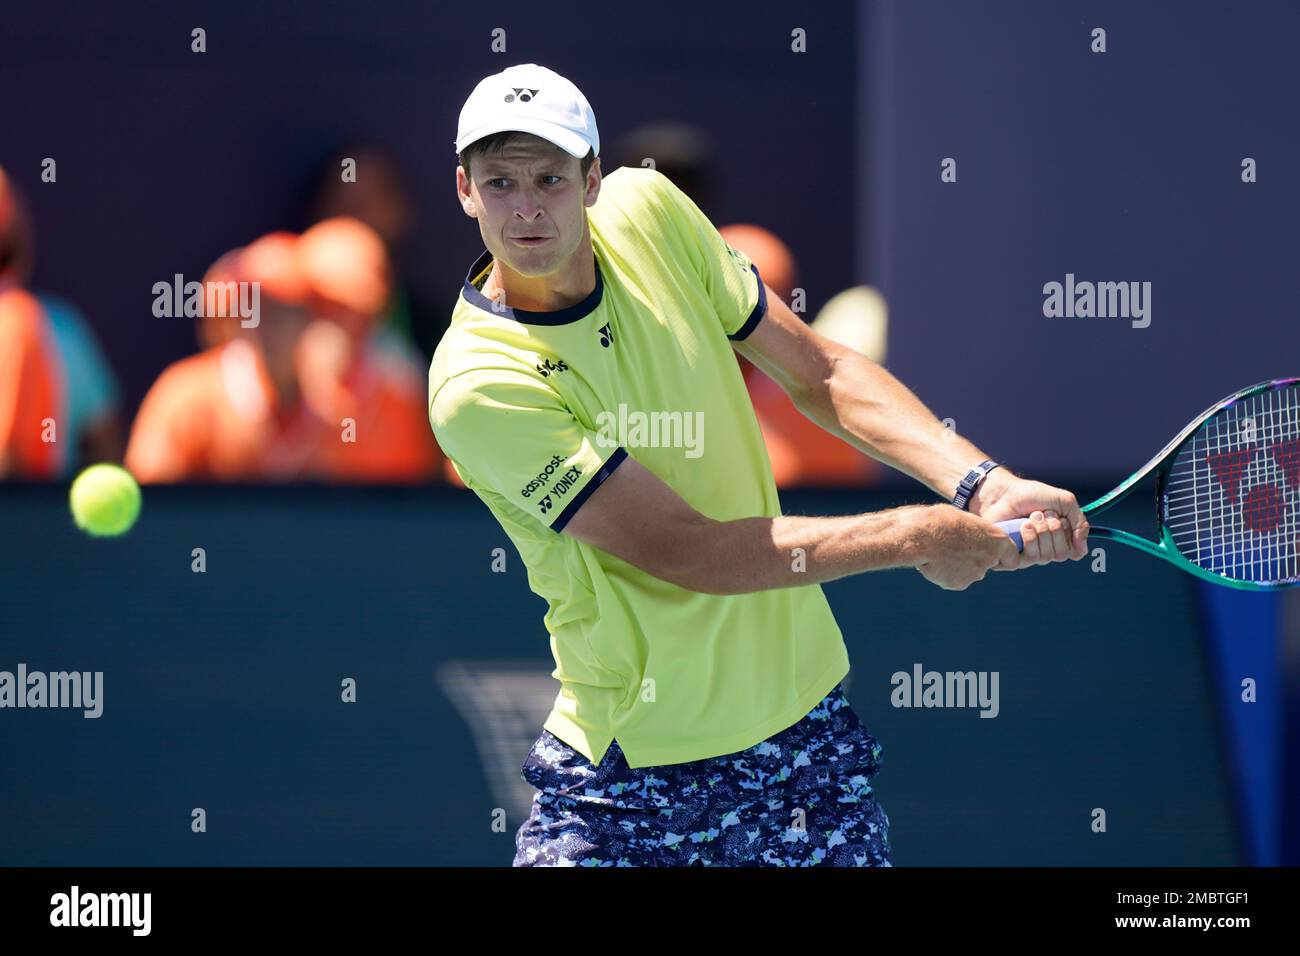 Hubert Hurkacz, of Poland returns a shot from Arthur Rinderknech, of France, during the Miami Open tennis tournament, Saturday, March 26, 2022, in Miami Gardens, Fla